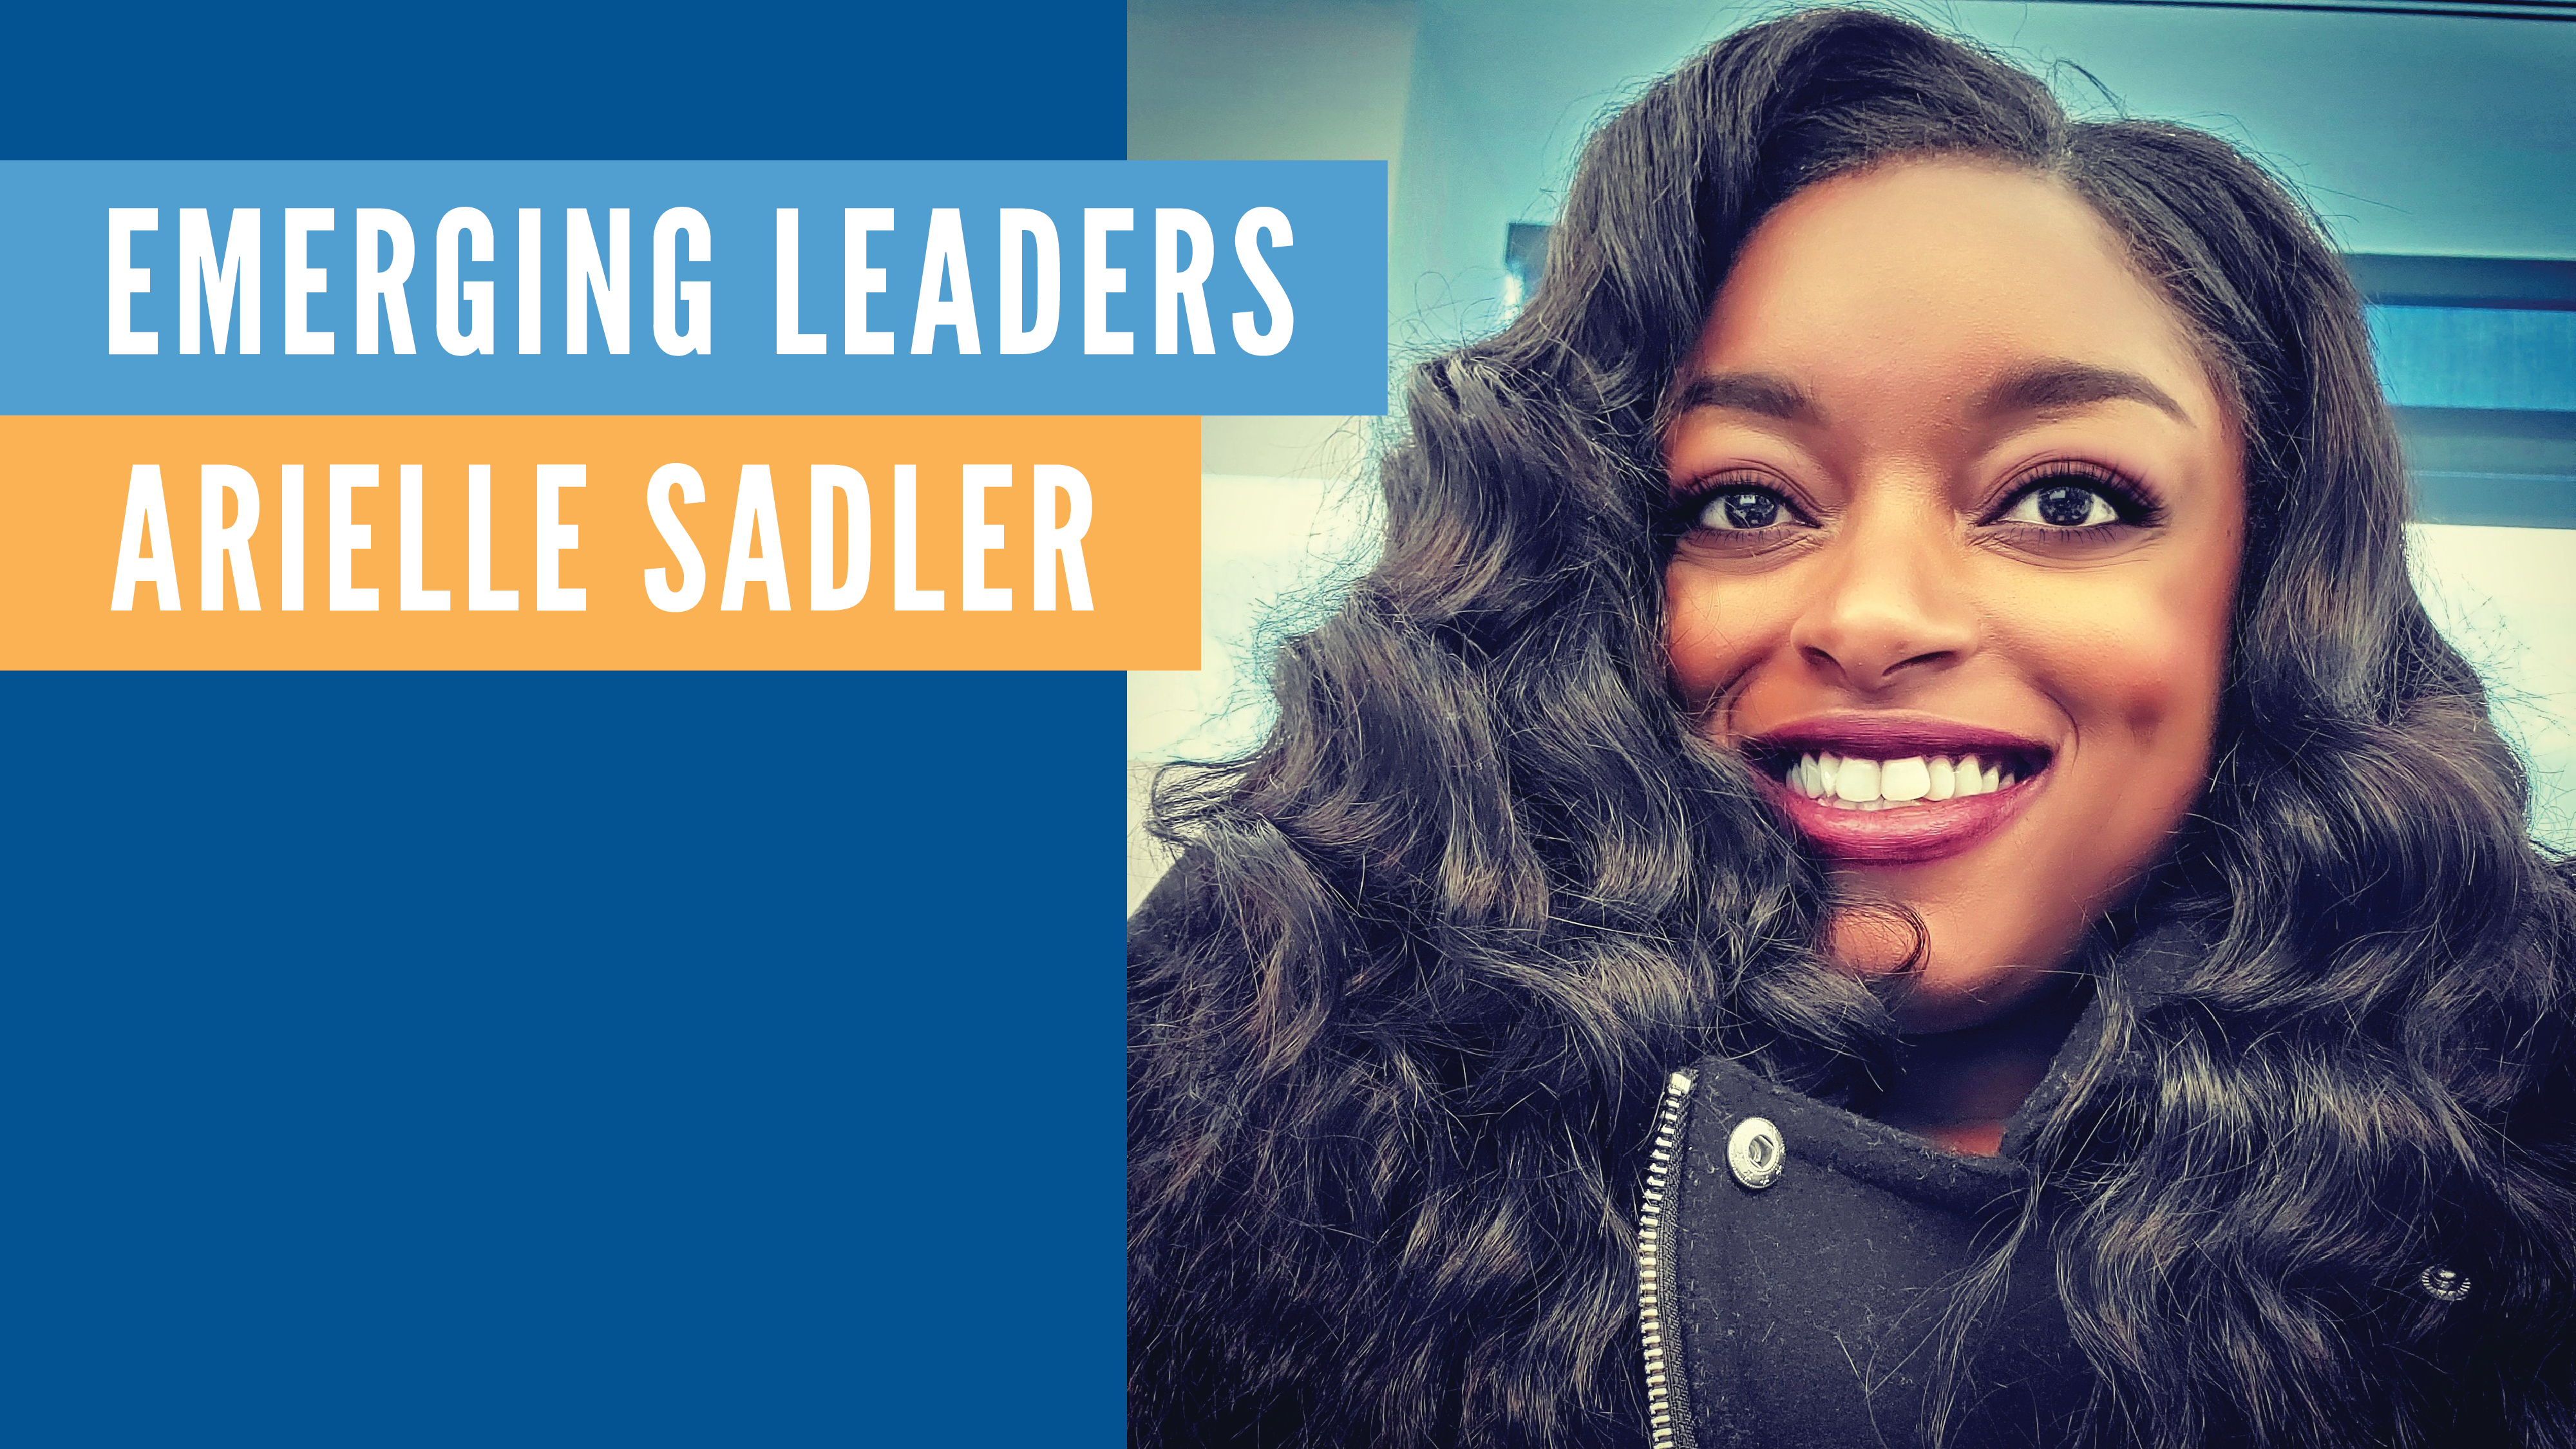 White text "Emerging Leaders" in light blue bar, White text "Arielle Sadler" in gold bar. 1/2 Blue background 1/2 photo of a young Black woman with long curly black hair, and a black jacket.